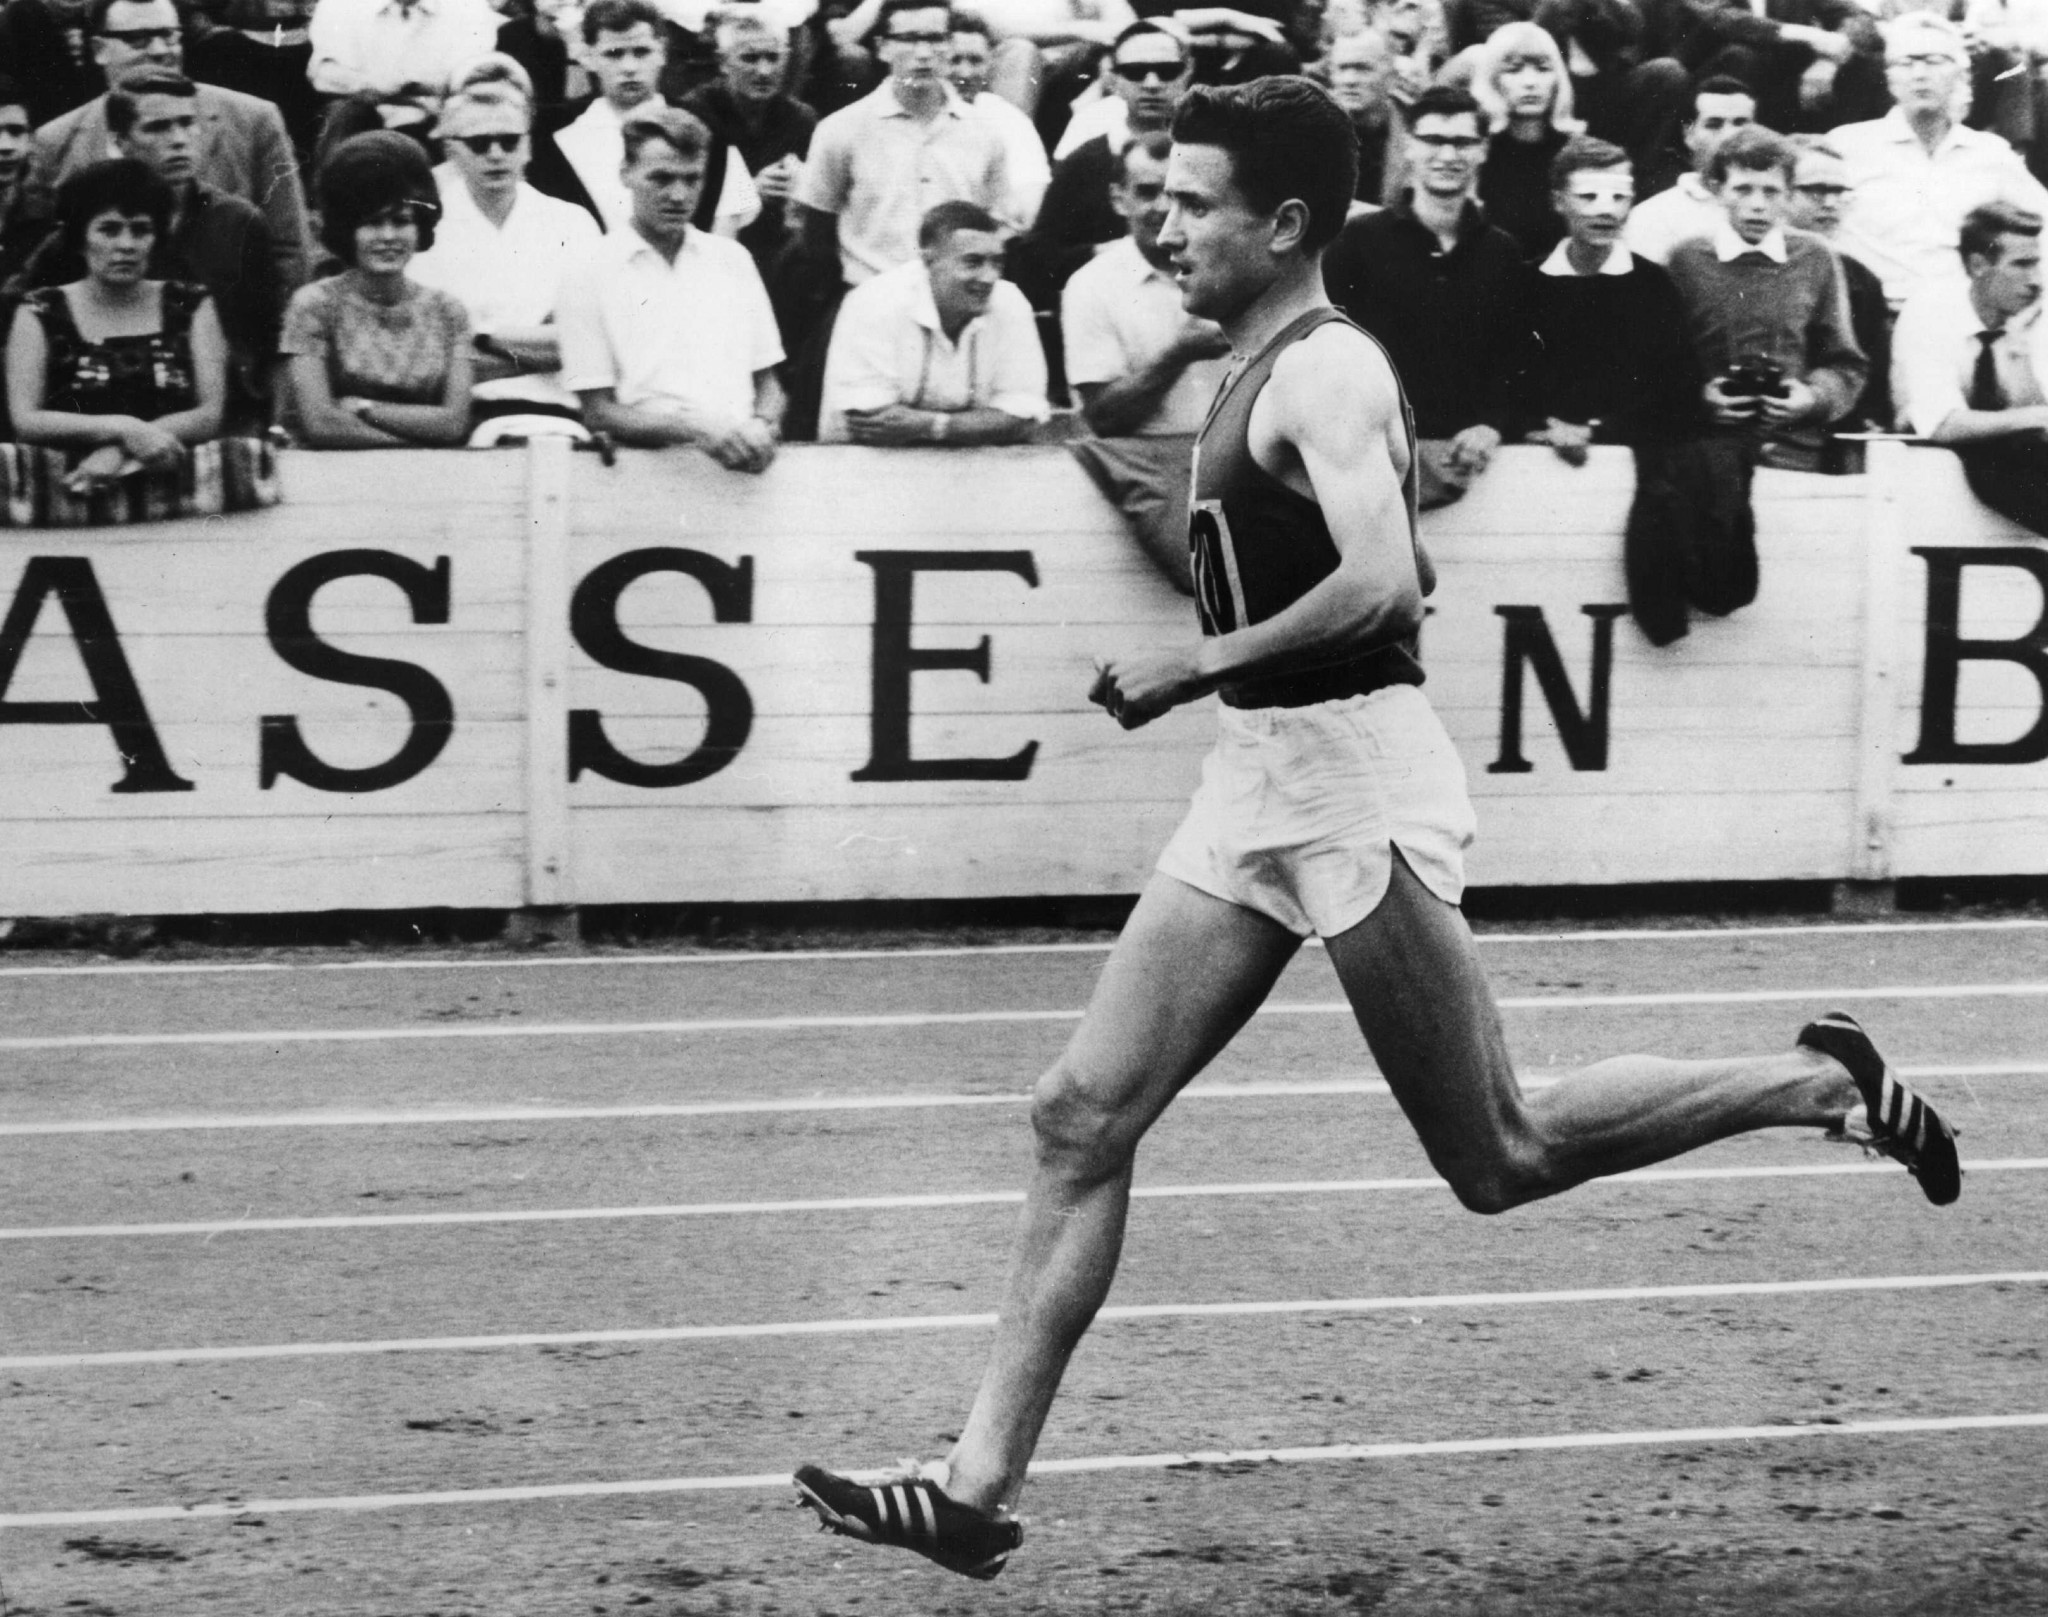 Michel Jazy, who won Olympic 1500m silver, European 1500 and 5000m gold and broke the mile record, roomed with Alain Mimoun as a 20-year-old at Melbourne 1956 - and learned from him ©Getty Images